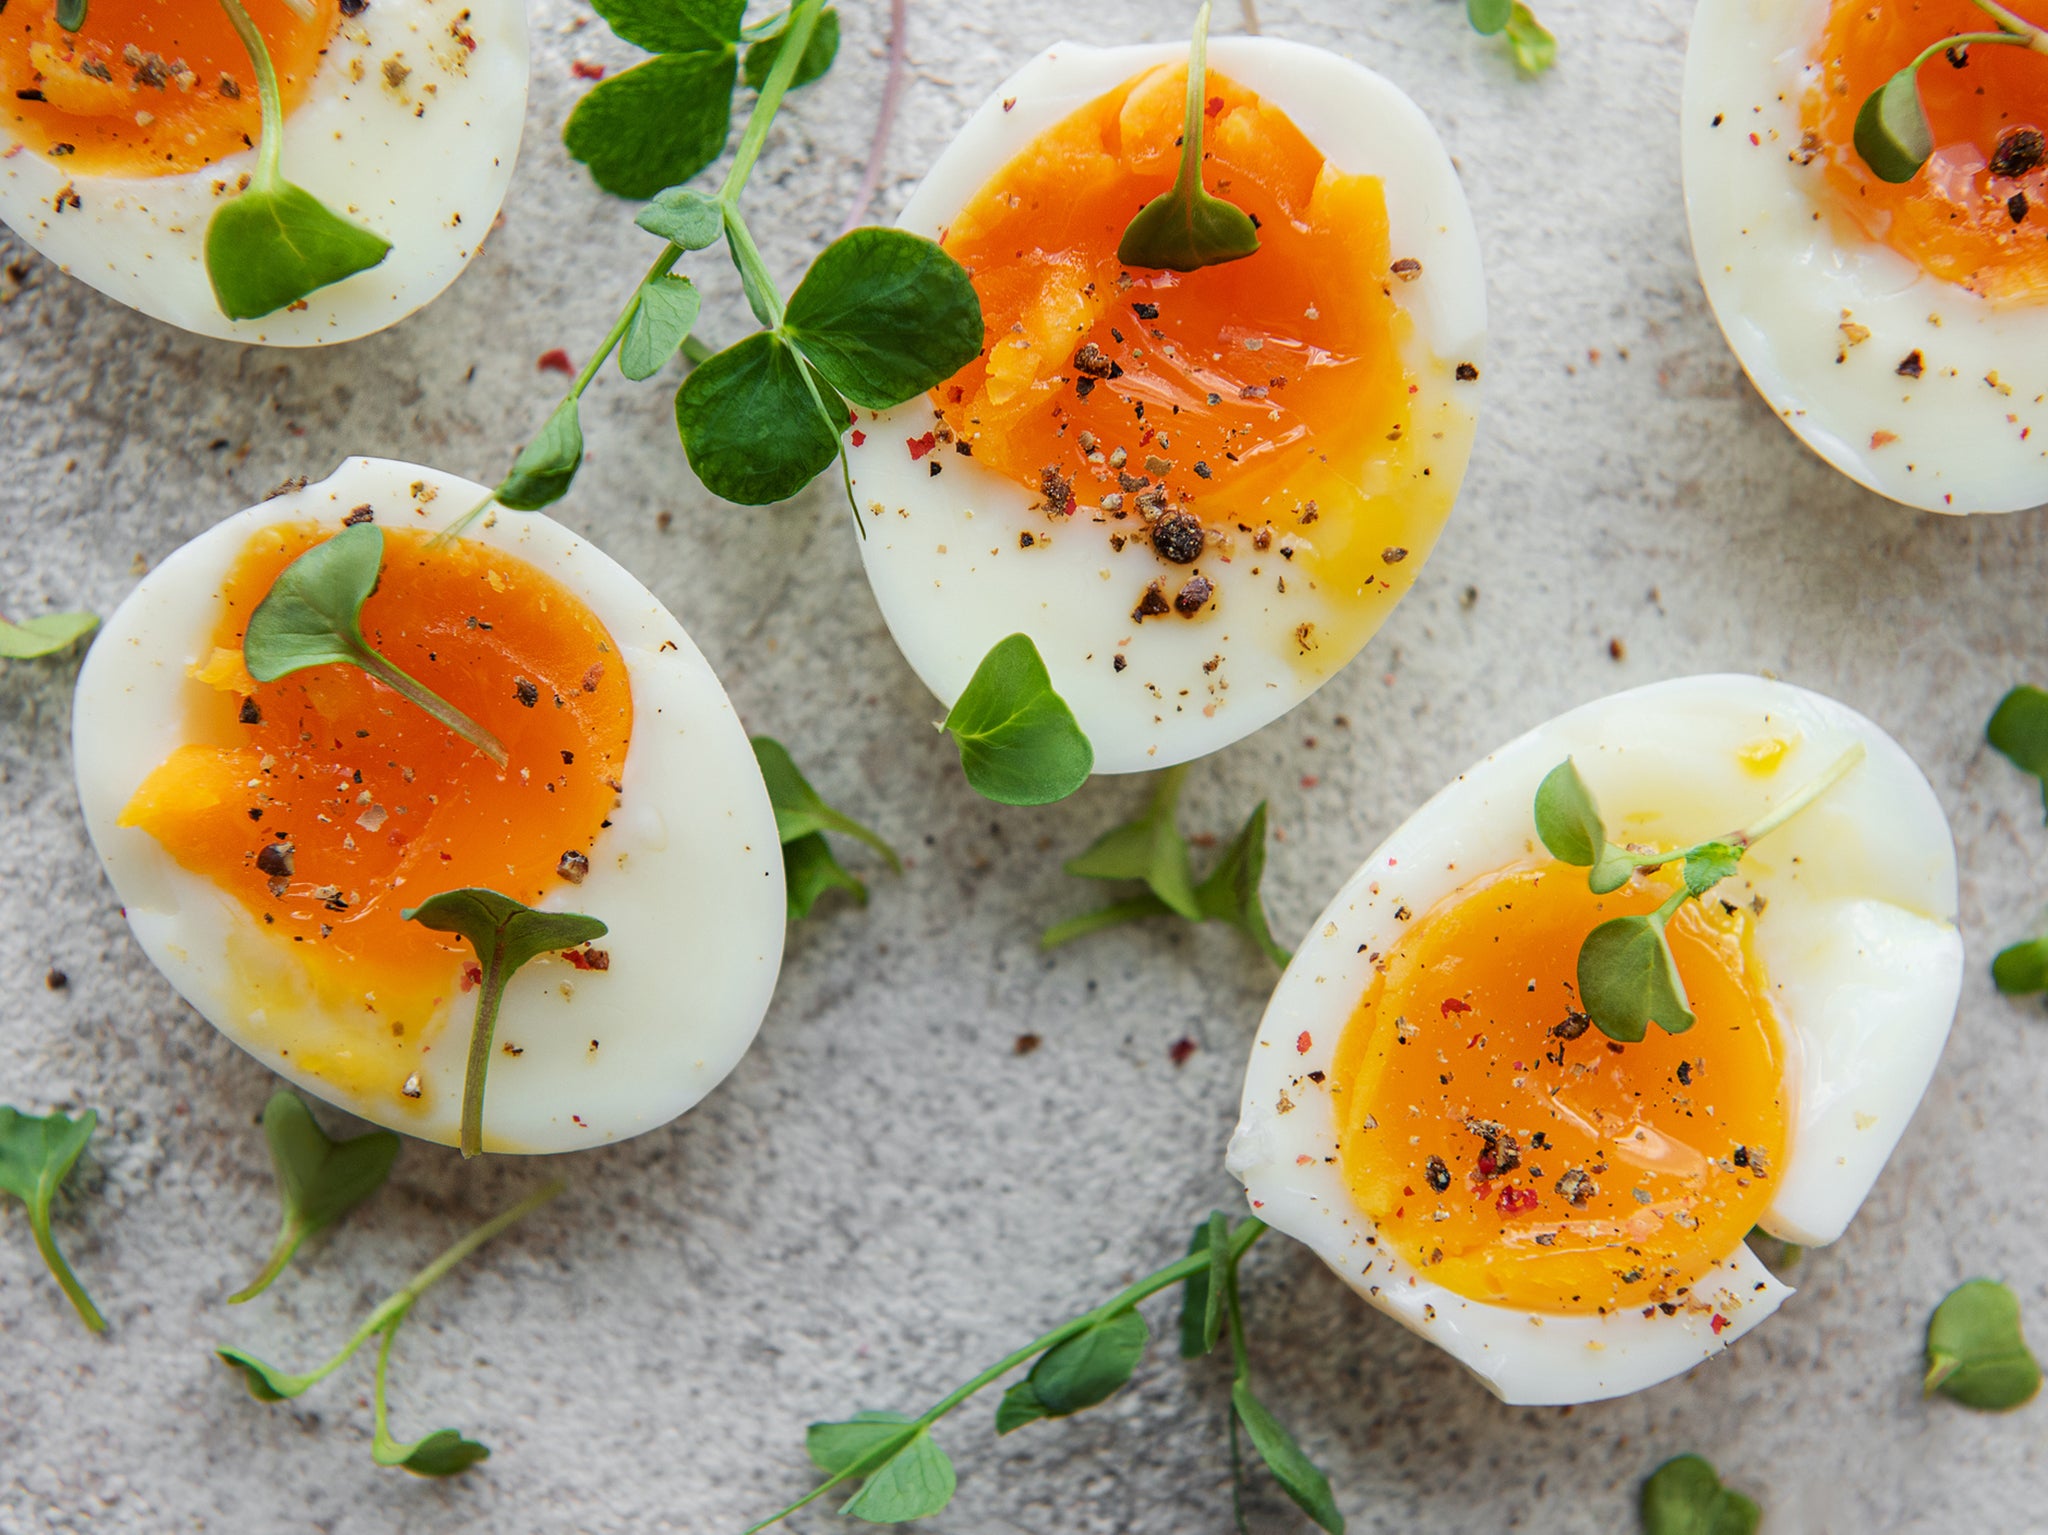 Eggs have become synonymous with the millennial phenomenon of brunch, but there’s so much more to them